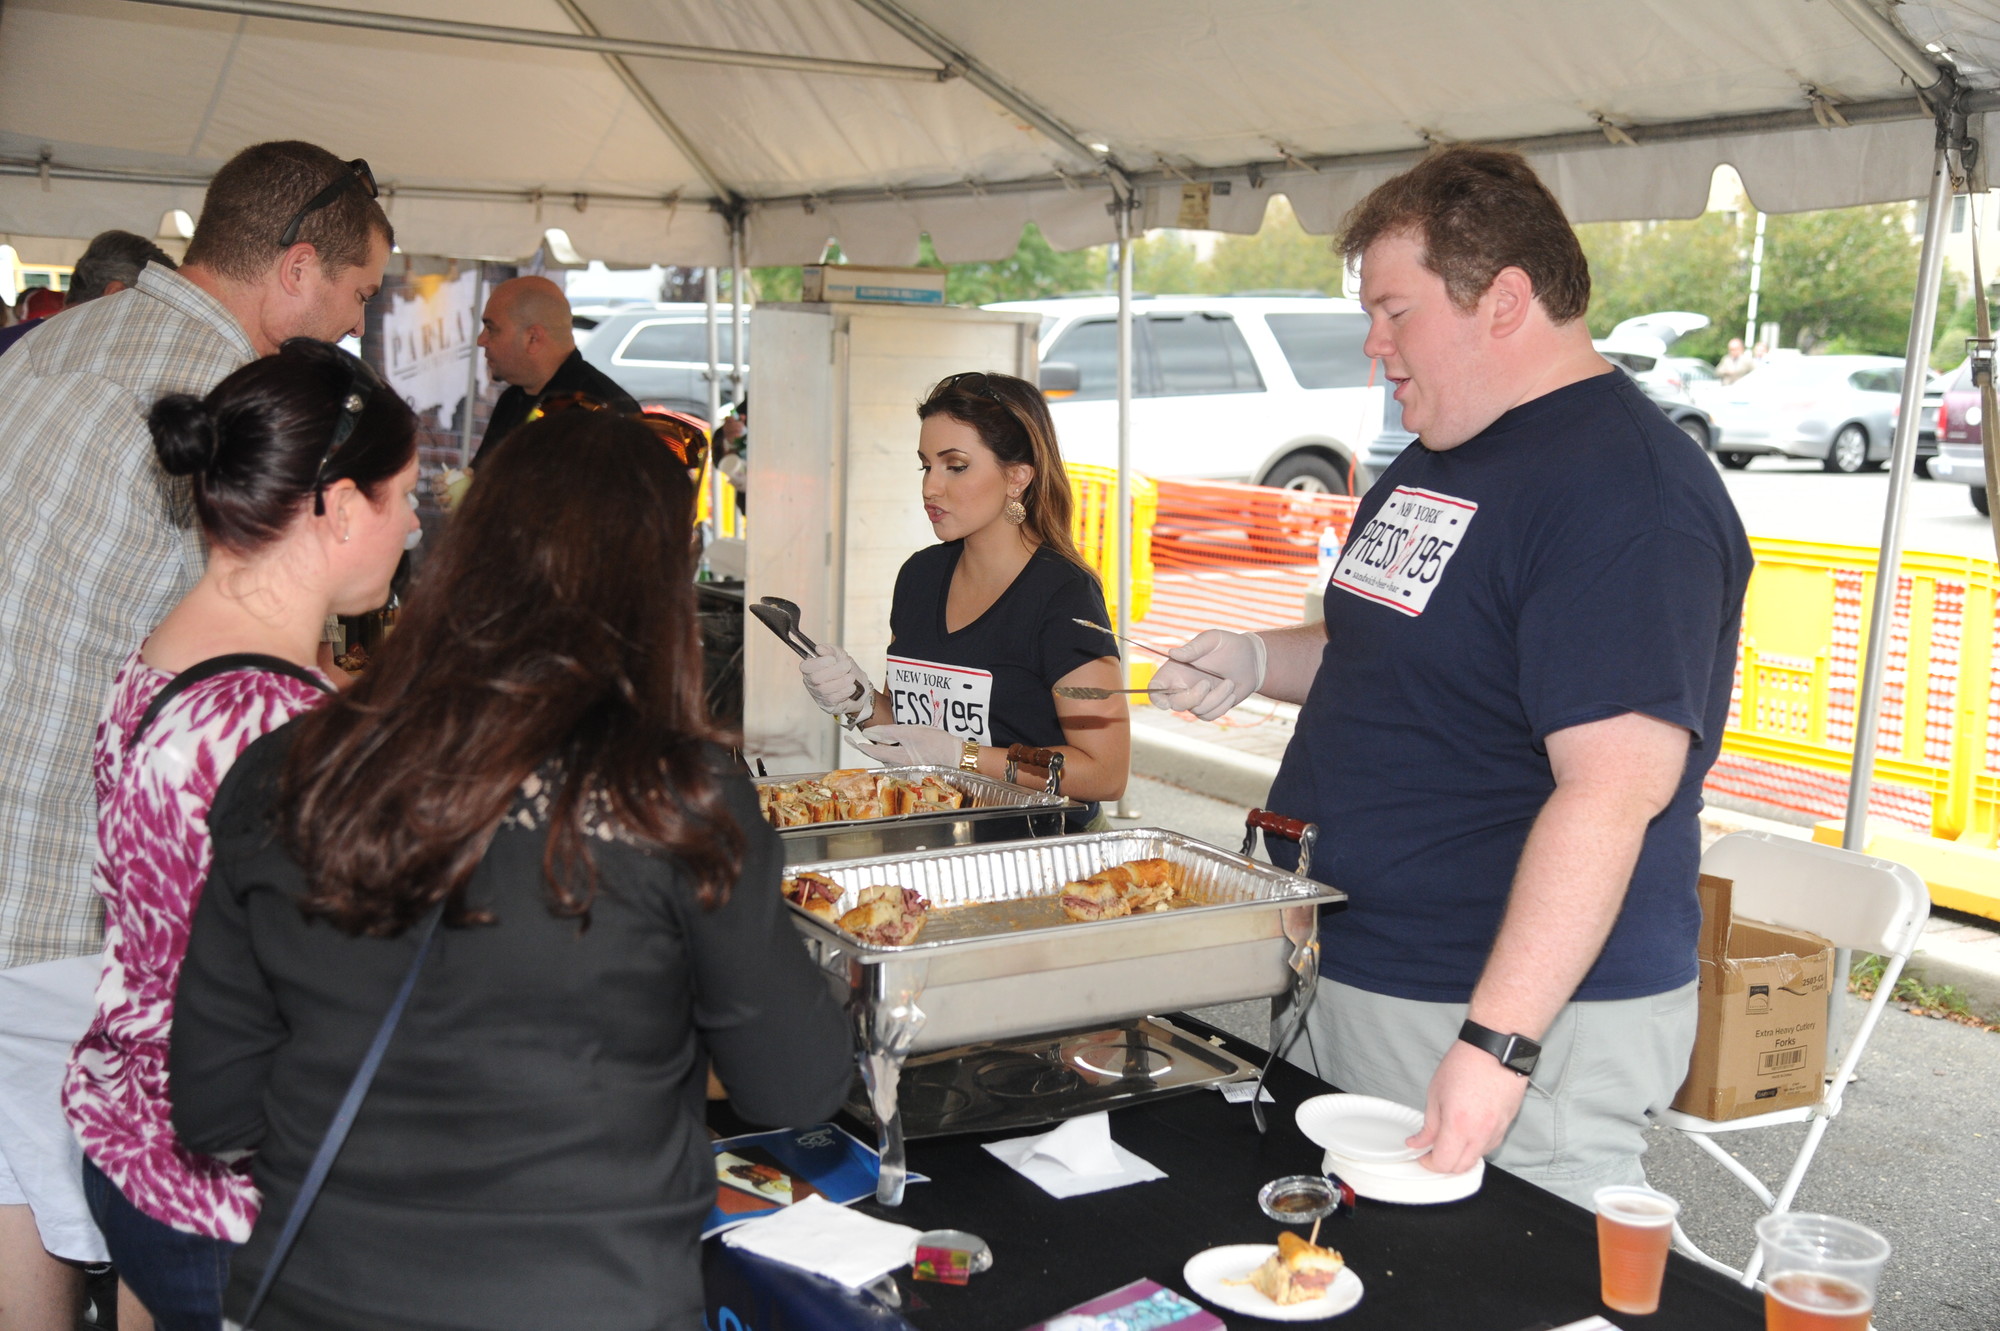 Marcella Matuozzi and John Staz of Press 195 served up samples of their trademark paninis.